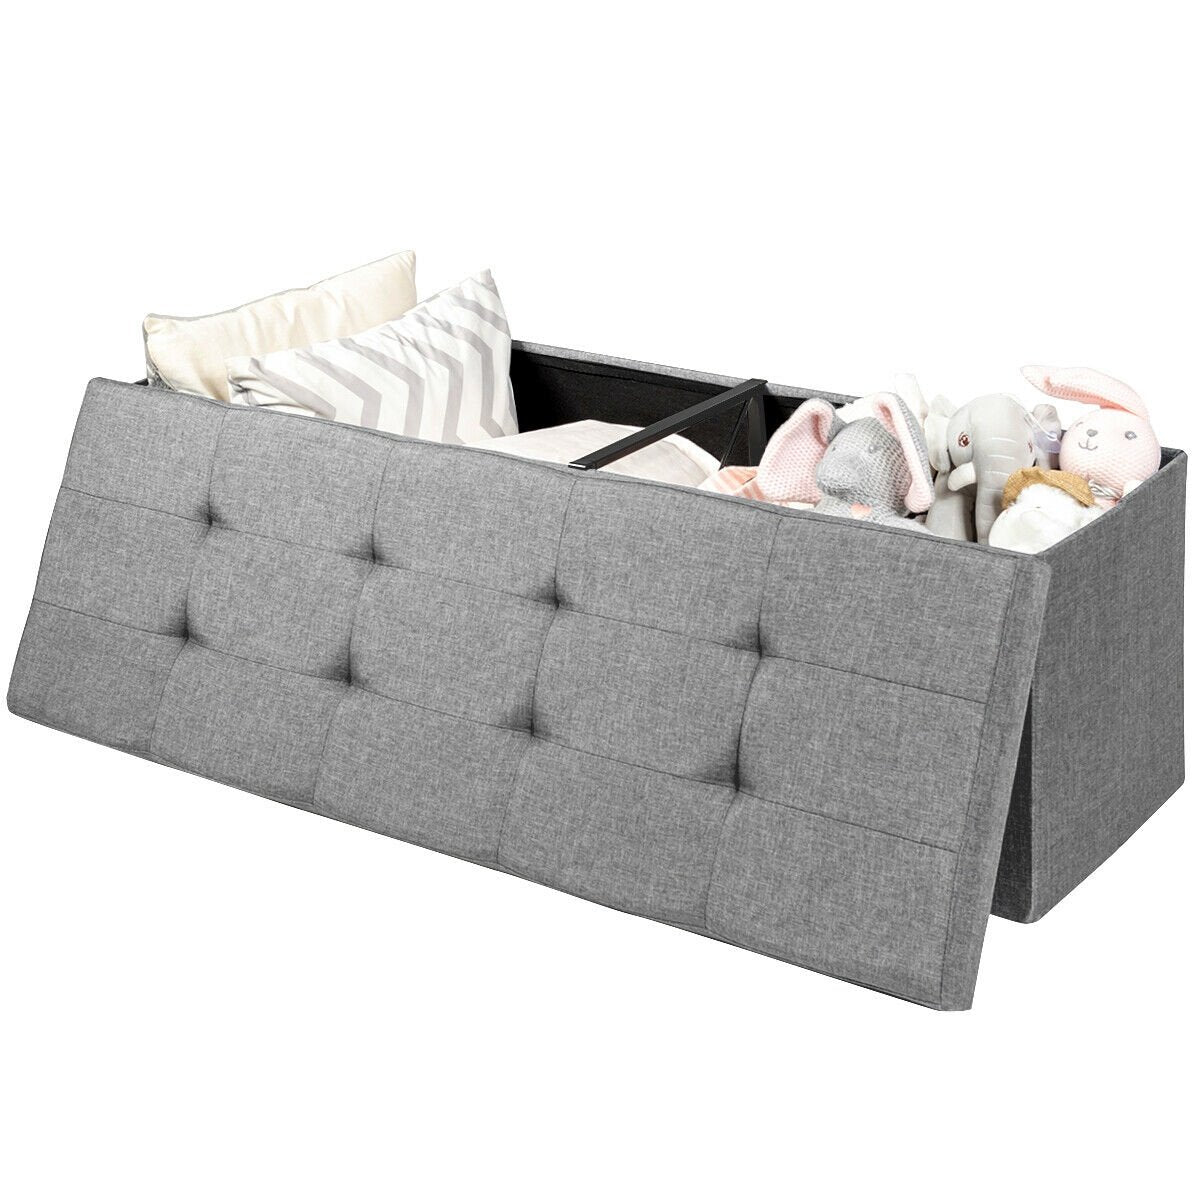 Large Fabric Folding Storage Chest with Smart lift Divider Bed End Ottoman Bench, Light Gray